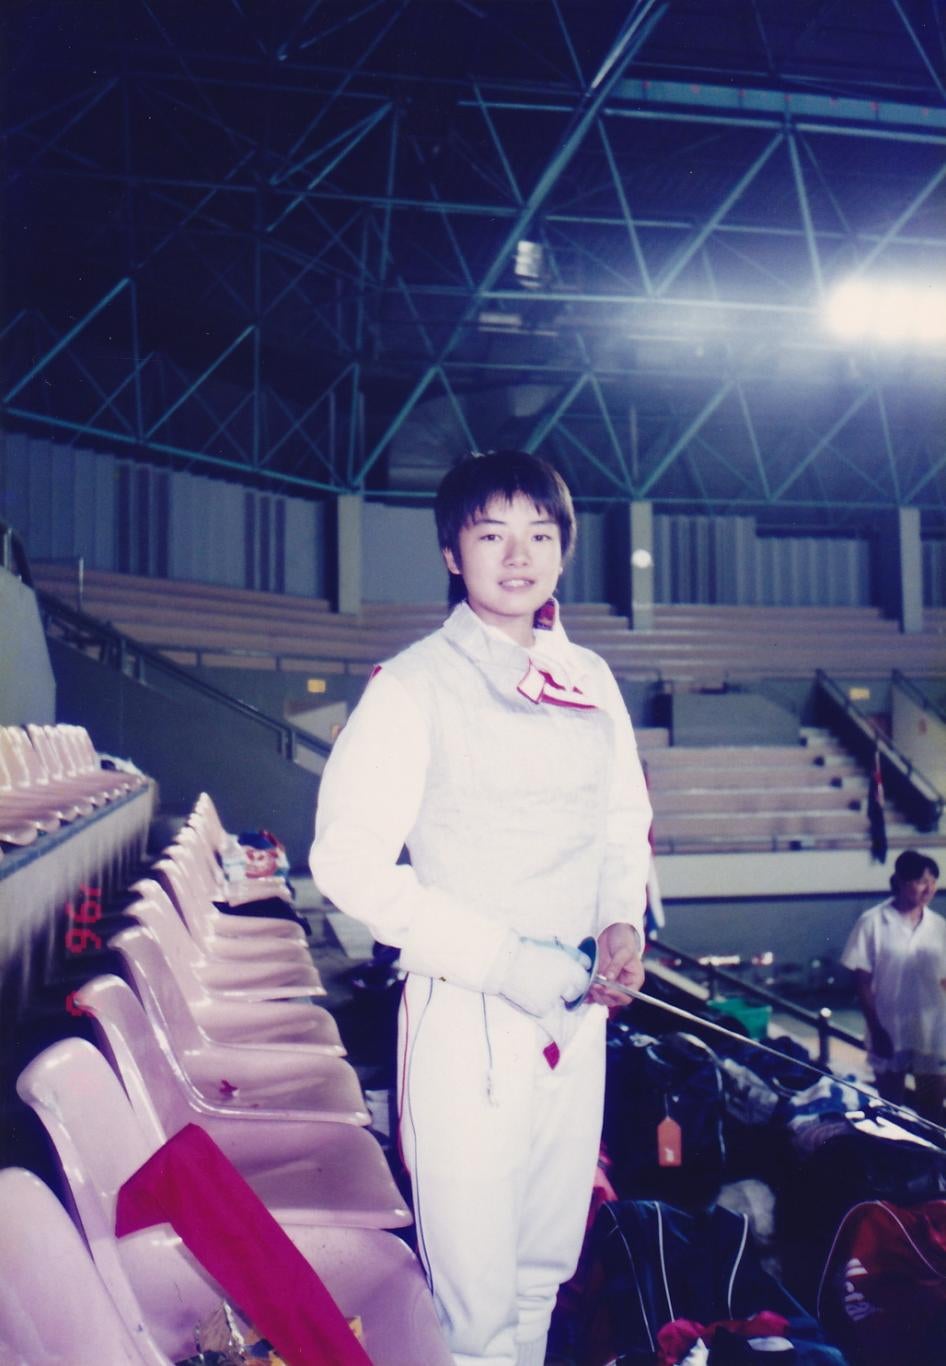 Fumino when he was a fencer for the Japanese national team